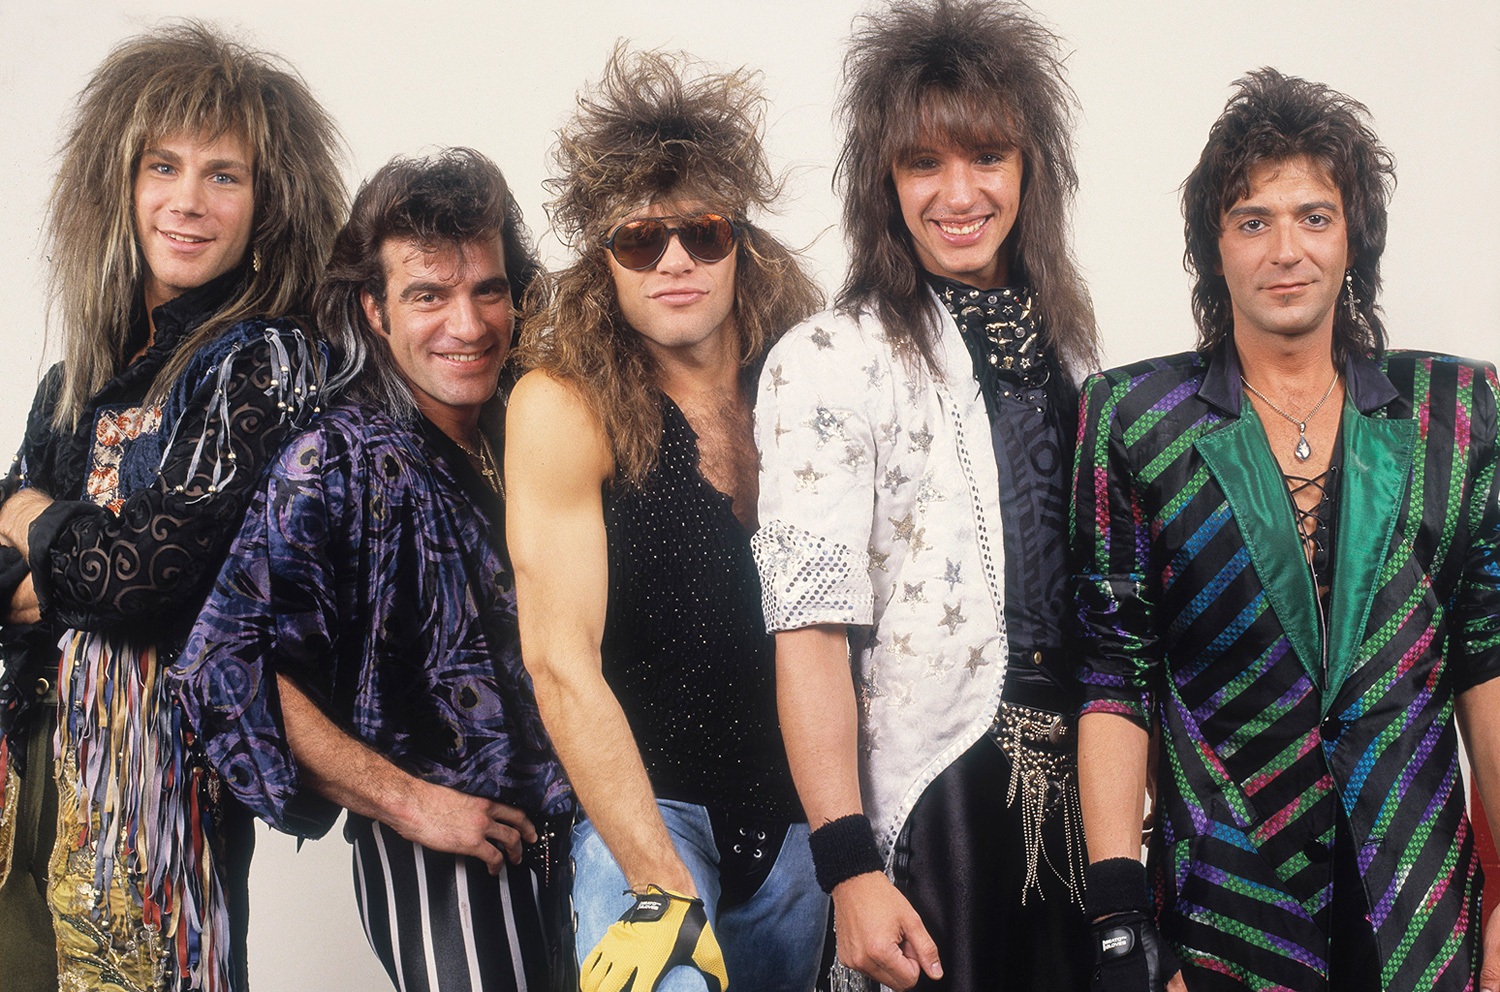 Bon Jovi 80s Hair Band Pictures Albums History 80s HAIR BANDS